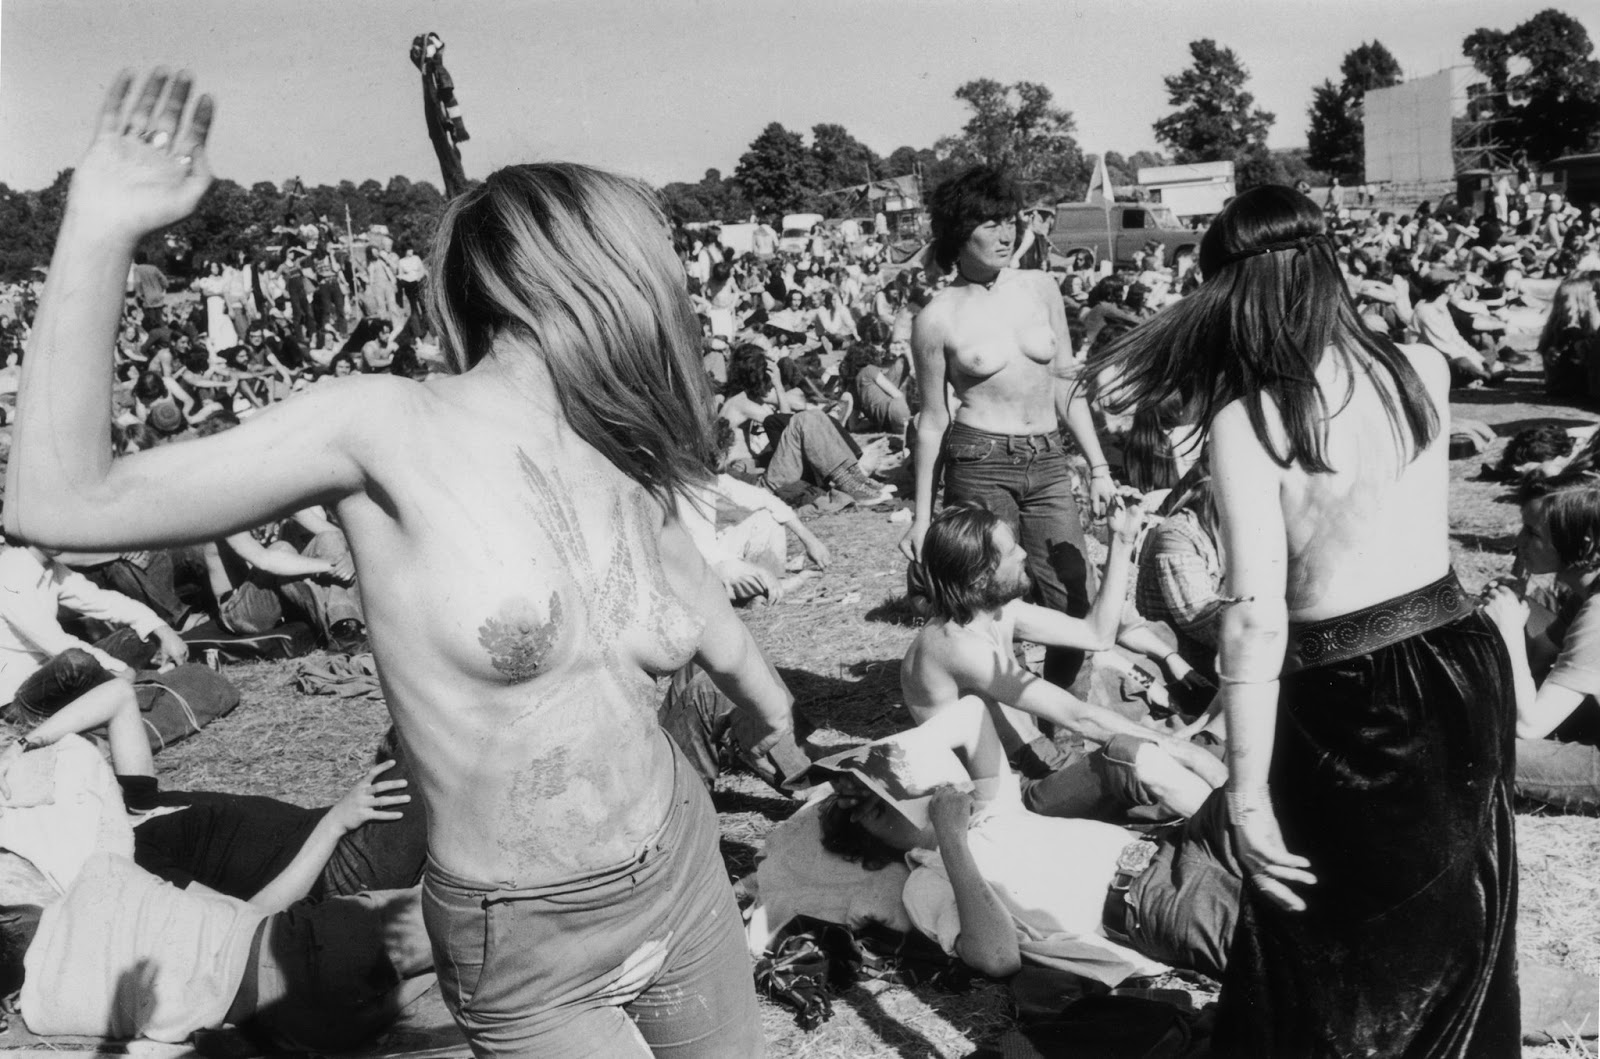 In the sixties, the hippie nude genre.